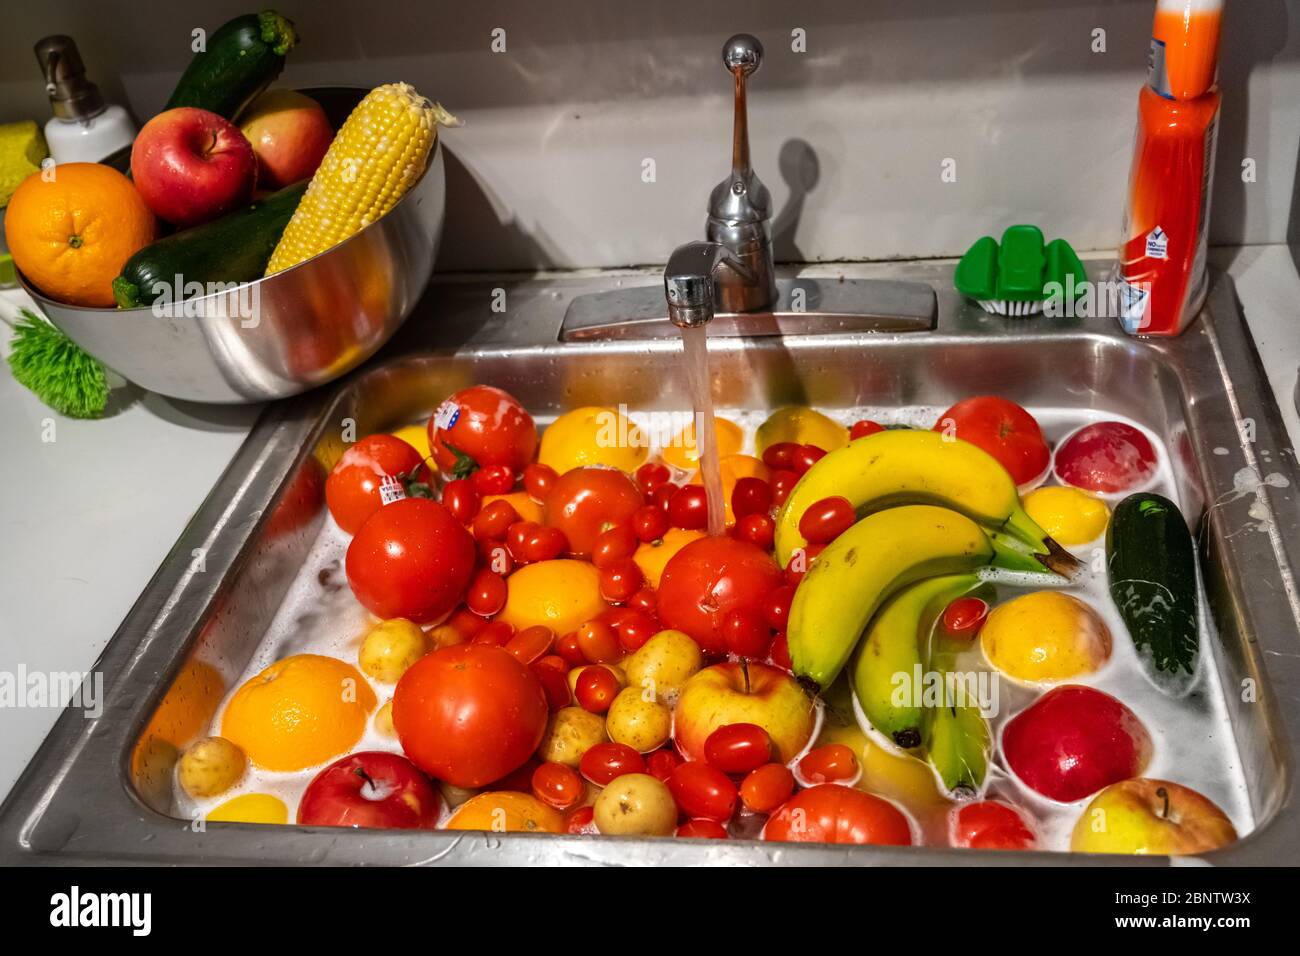 https://c8.alamy.com/comp/2BNTW3X/new-york-usa-12may-2020-fresh-fruits-and-vegetables-are-now-regularly-washed-and-disinfected-in-new-york-city-to-prevent-infection-during-the-cor-2BNTW3X.jpg